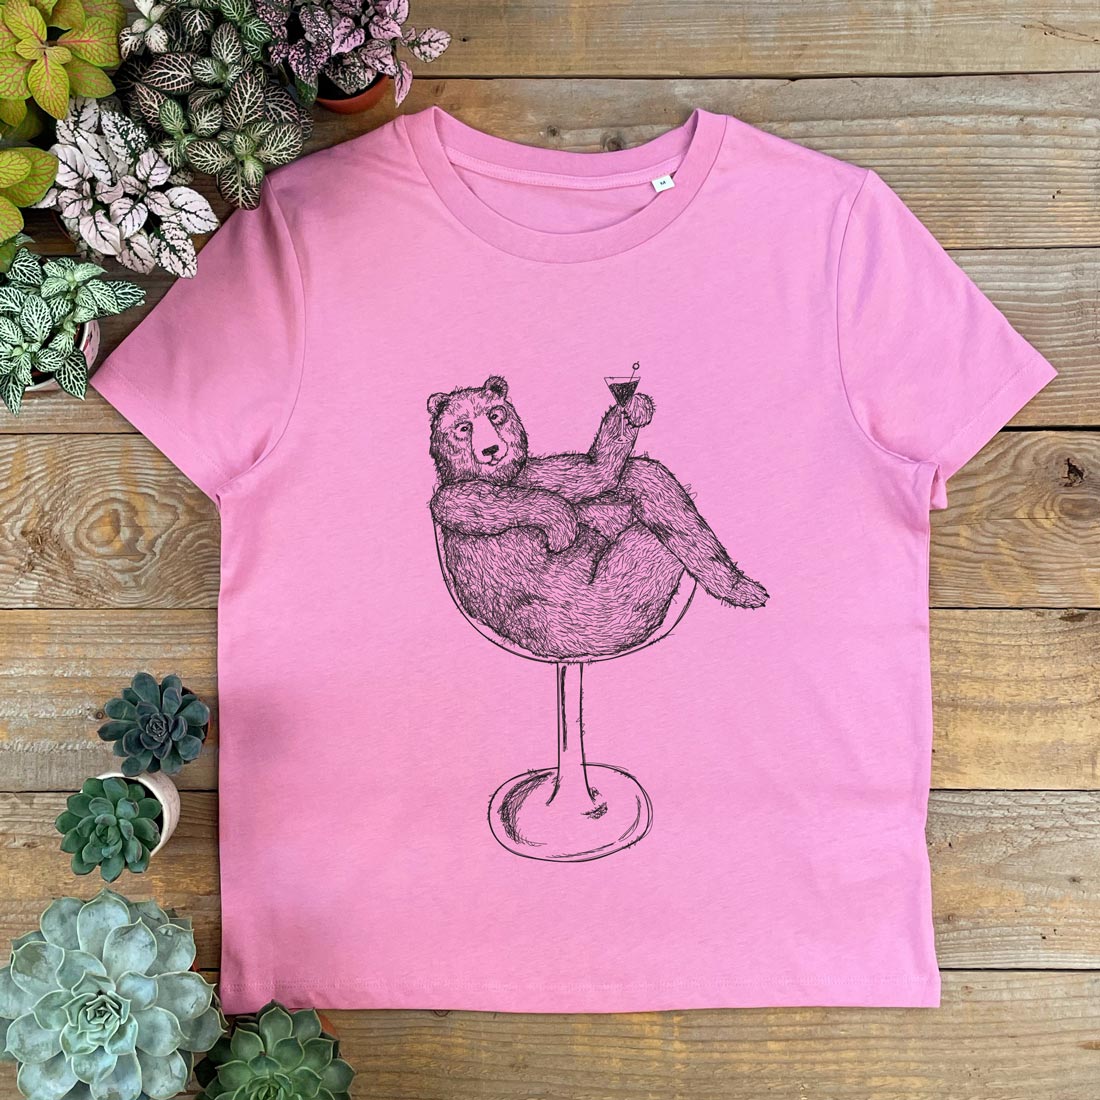 PINK SCOOP TSHIRT WITH BEAR SAT IN COCKTAIL GLASS